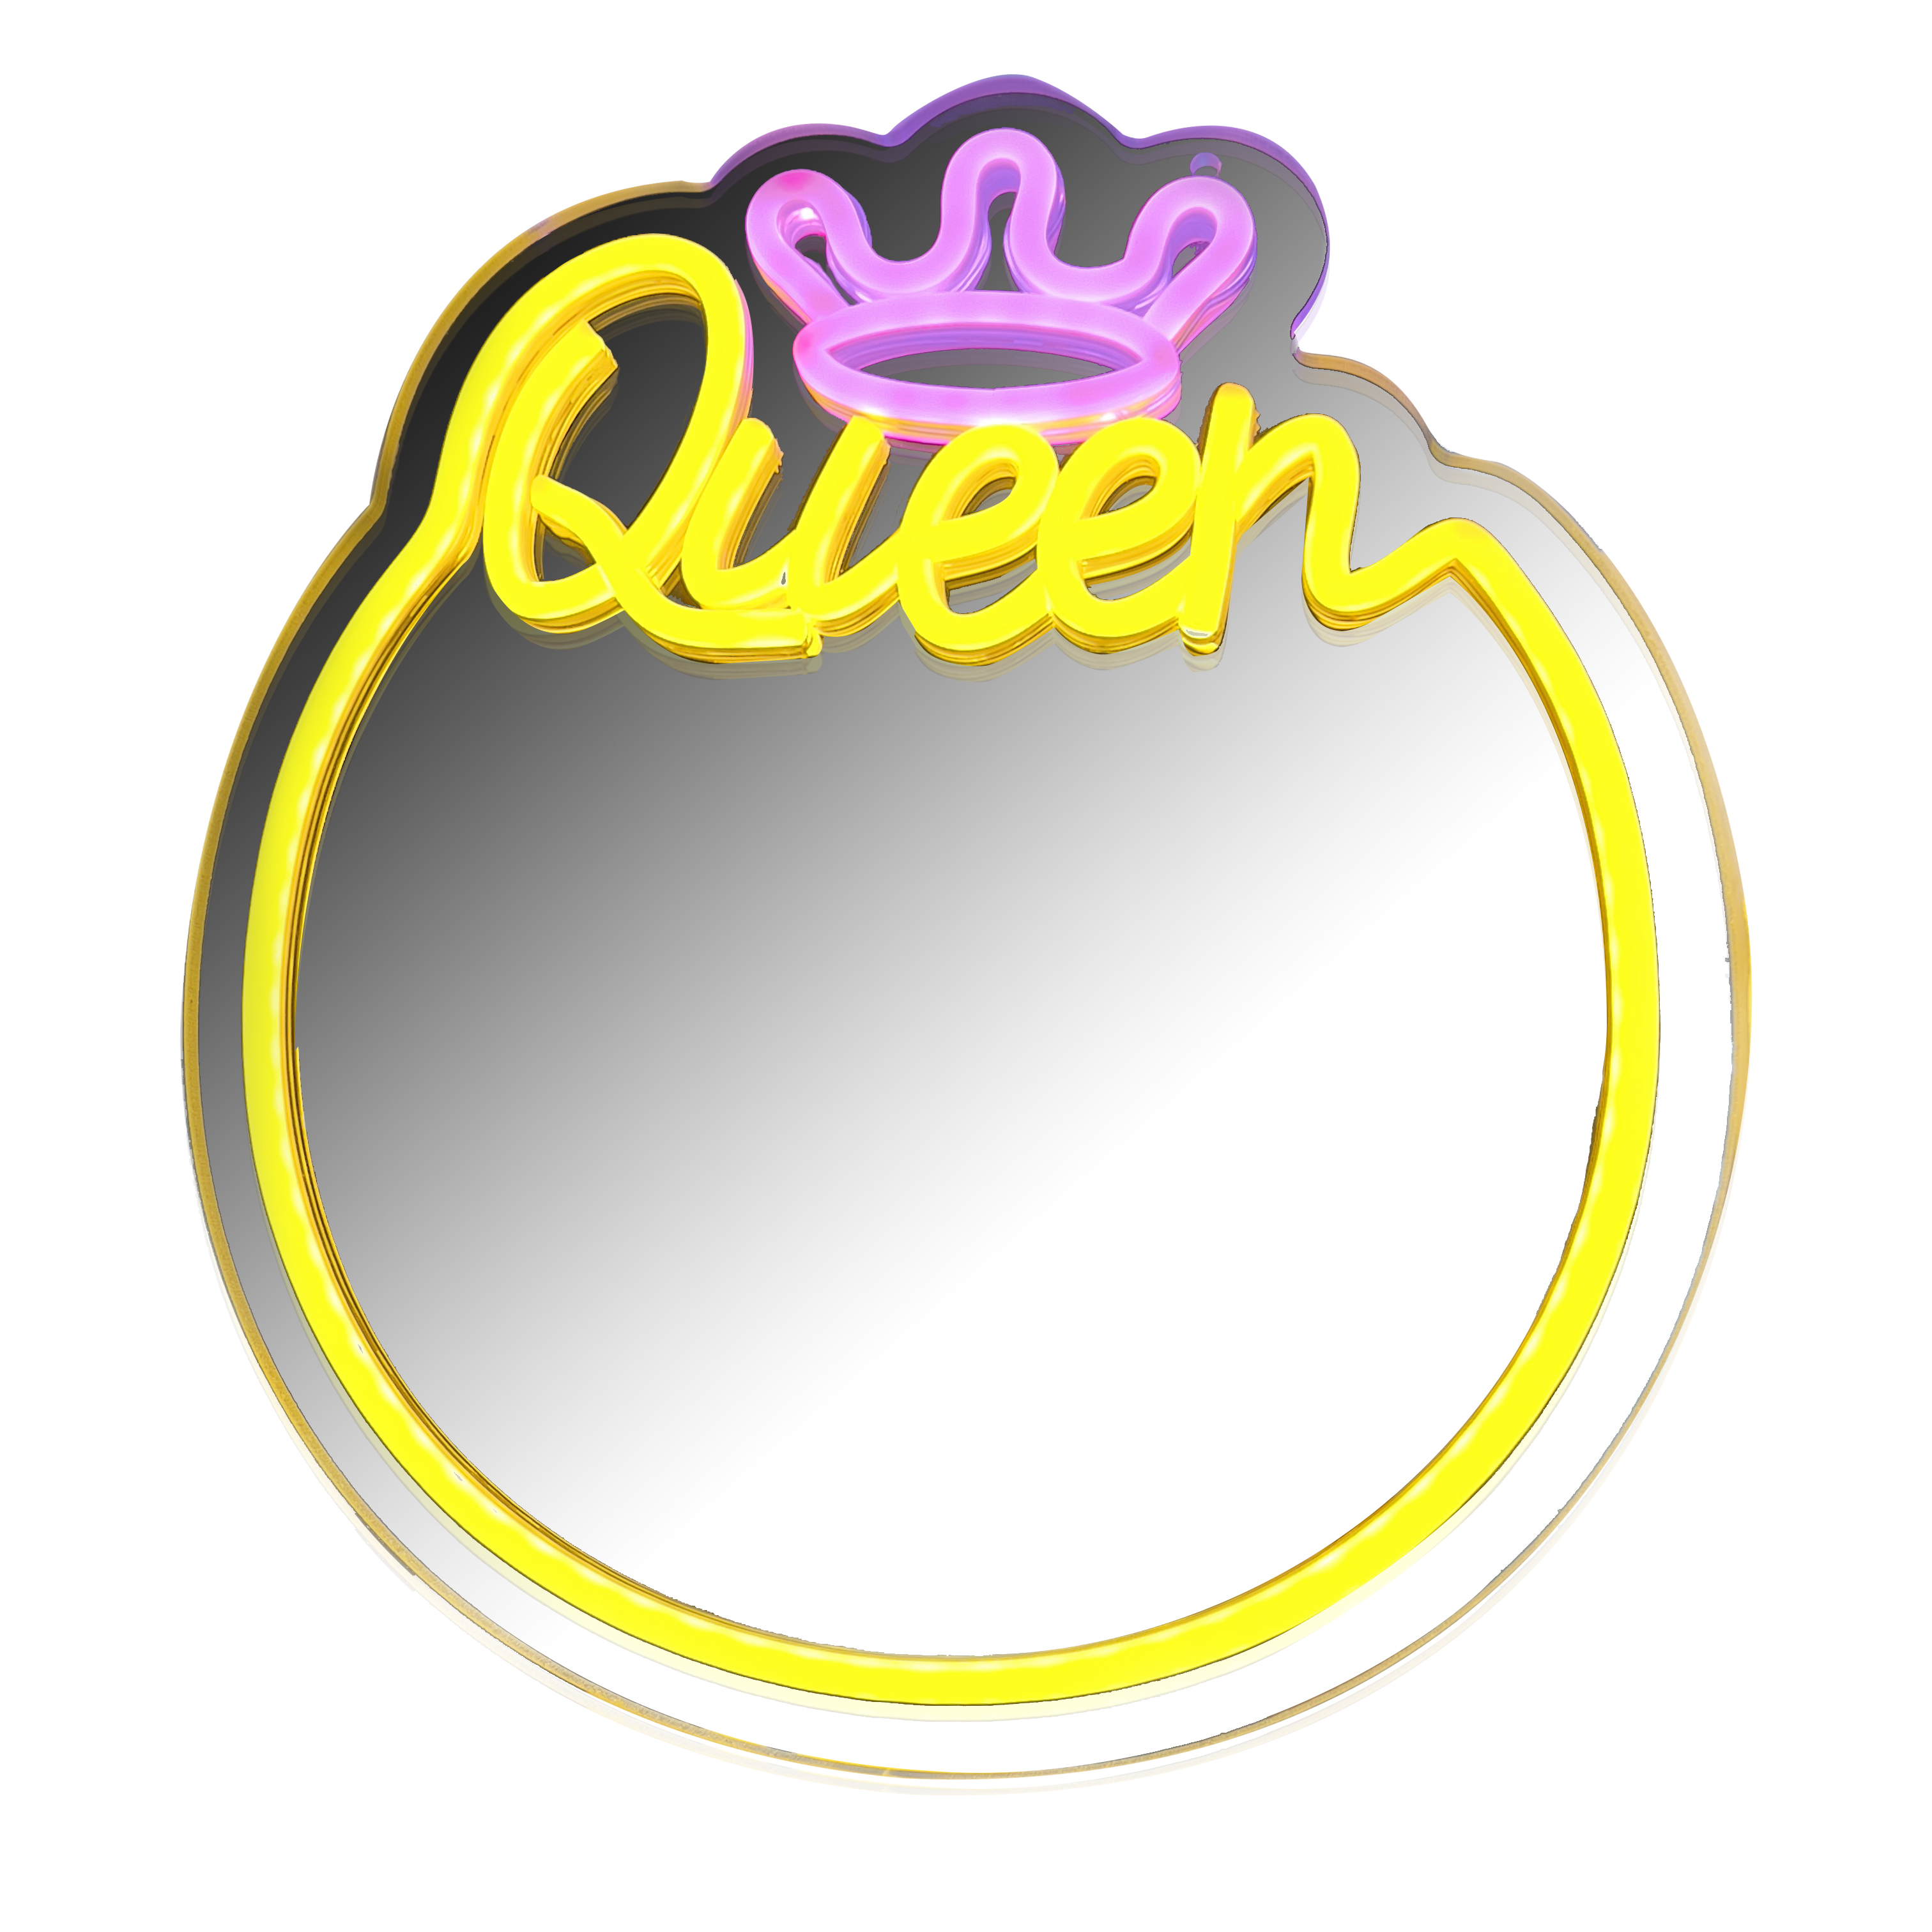 Queen Neon Mirror for Wall Decor USB Powered